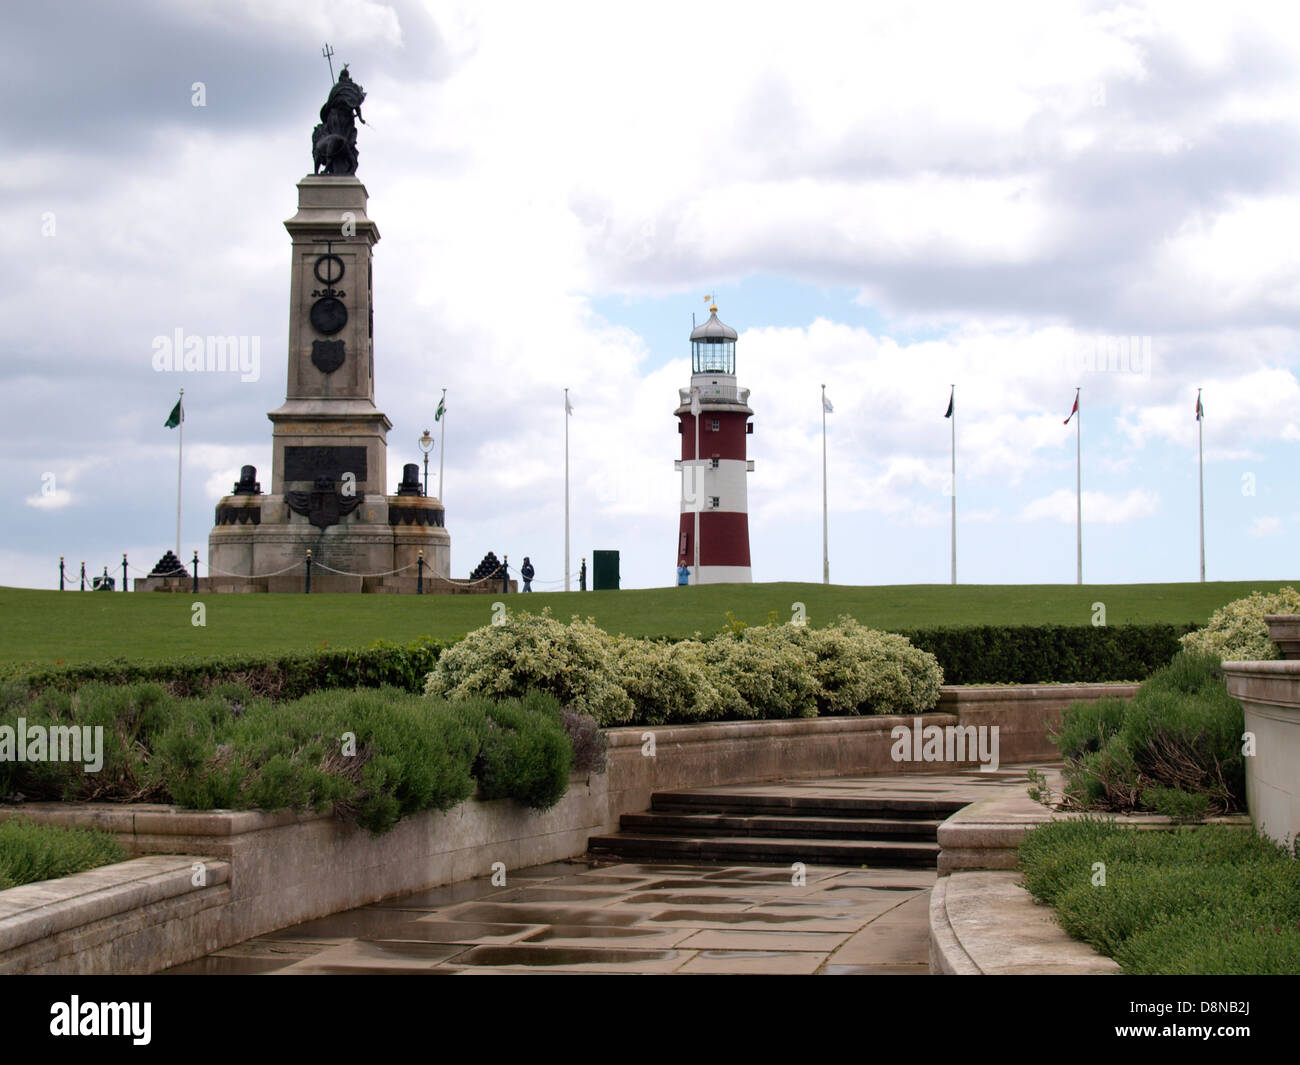 Smeaton's Tower lighthouse, Plymouth Hoe, Devon, UK 2013 Banque D'Images